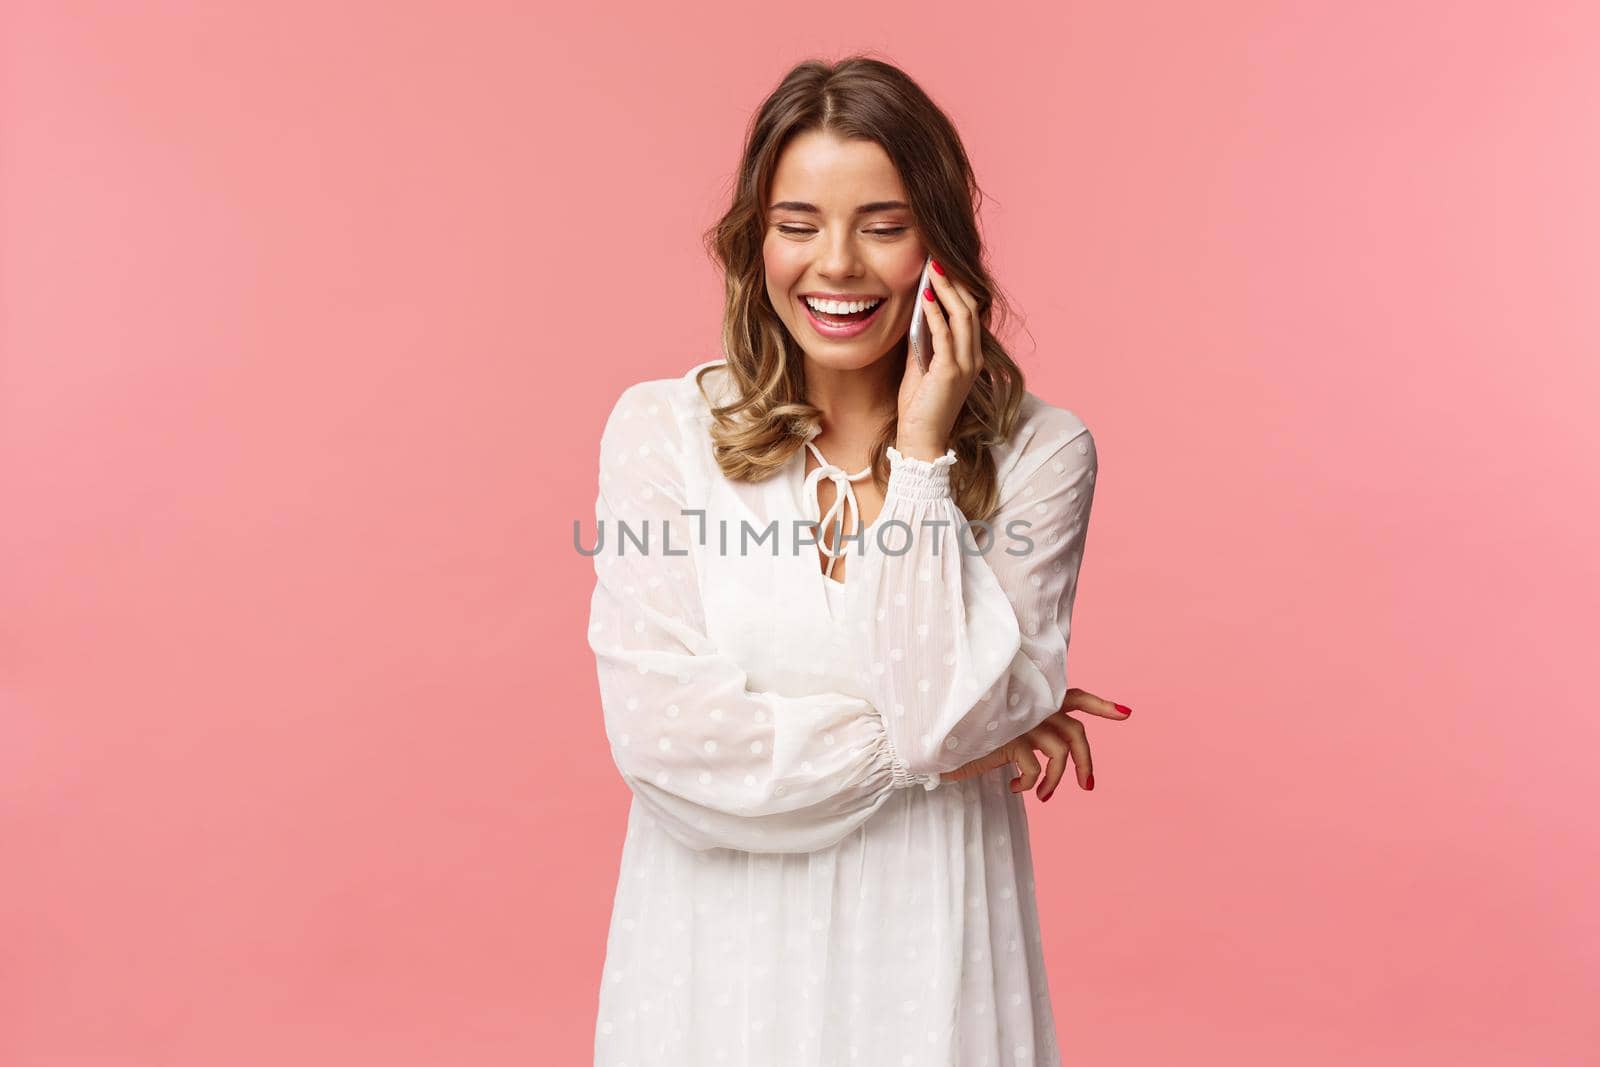 Communication and technology concept. Attractive caucasian female in white dress, blond short haircut, hold smartphone, talking on mobile phone and laughing, smiling carefree, pink background.